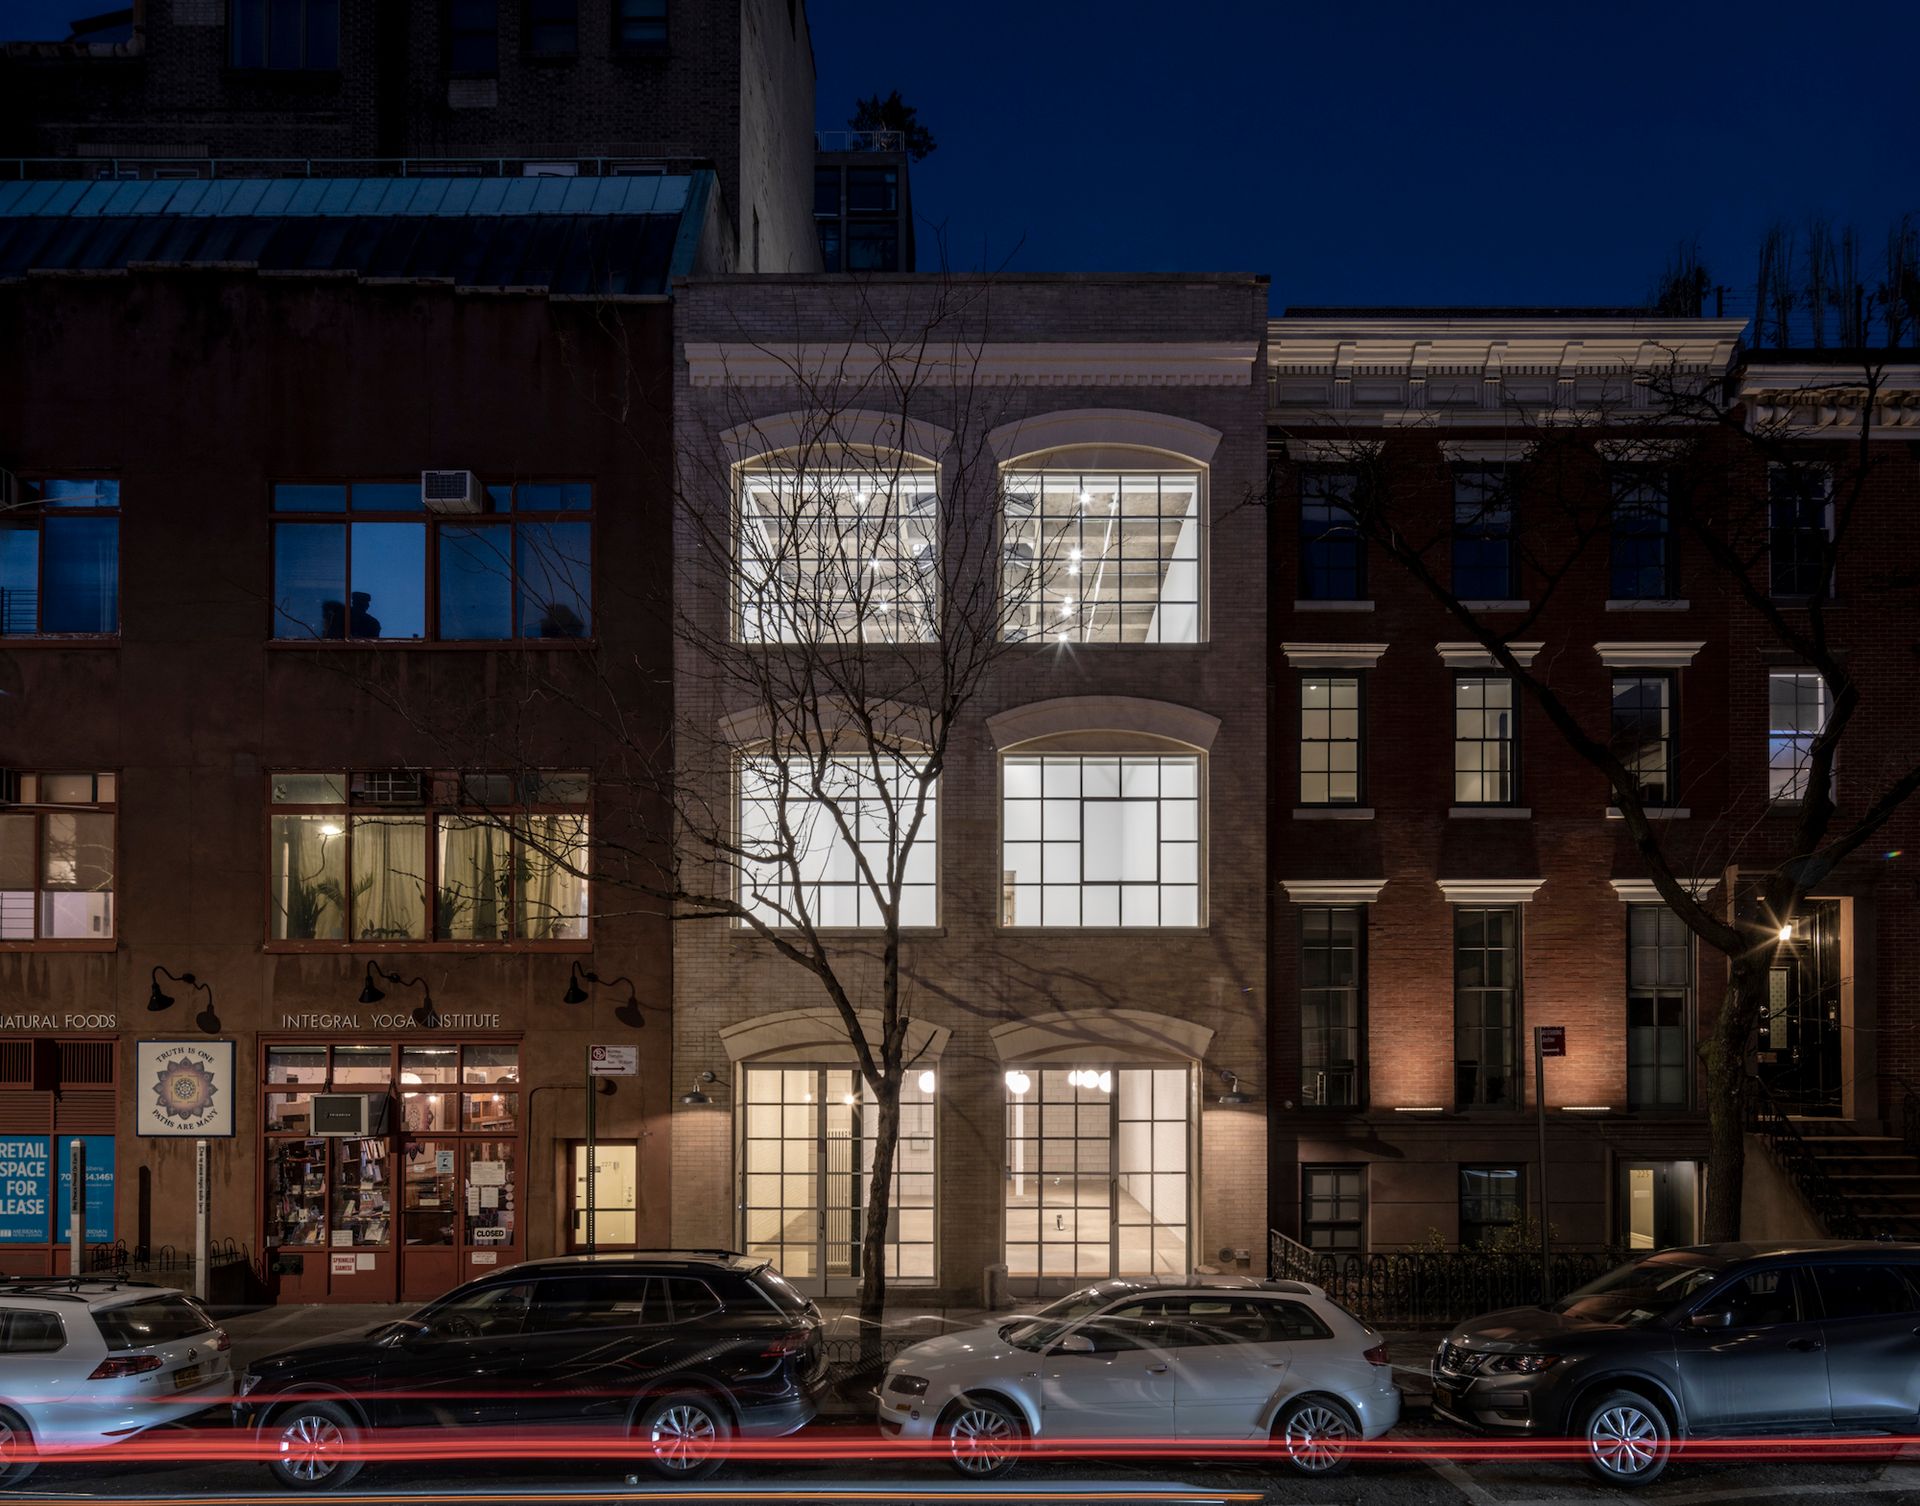 The façade of CARA on West 13th Street in Manhattan Photo by Michael Vahrenwald, courtesy CARA